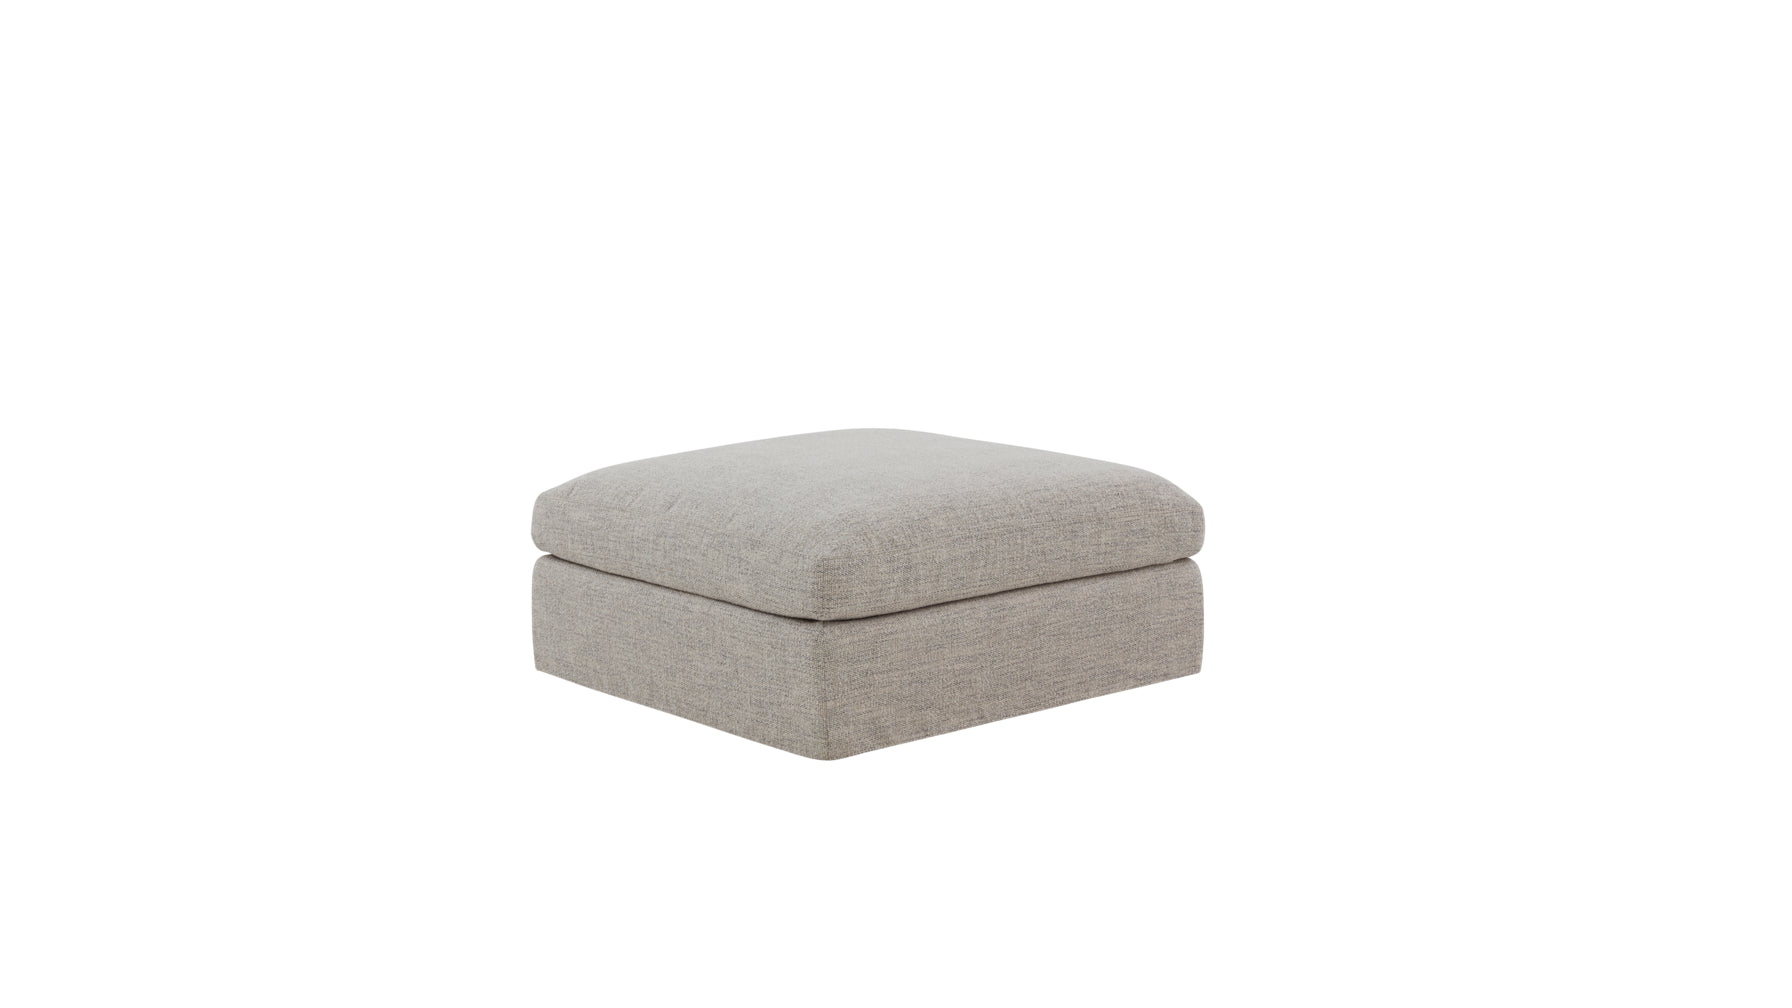 Get Together™ Ottoman, Large, Oatmeal - Image 2